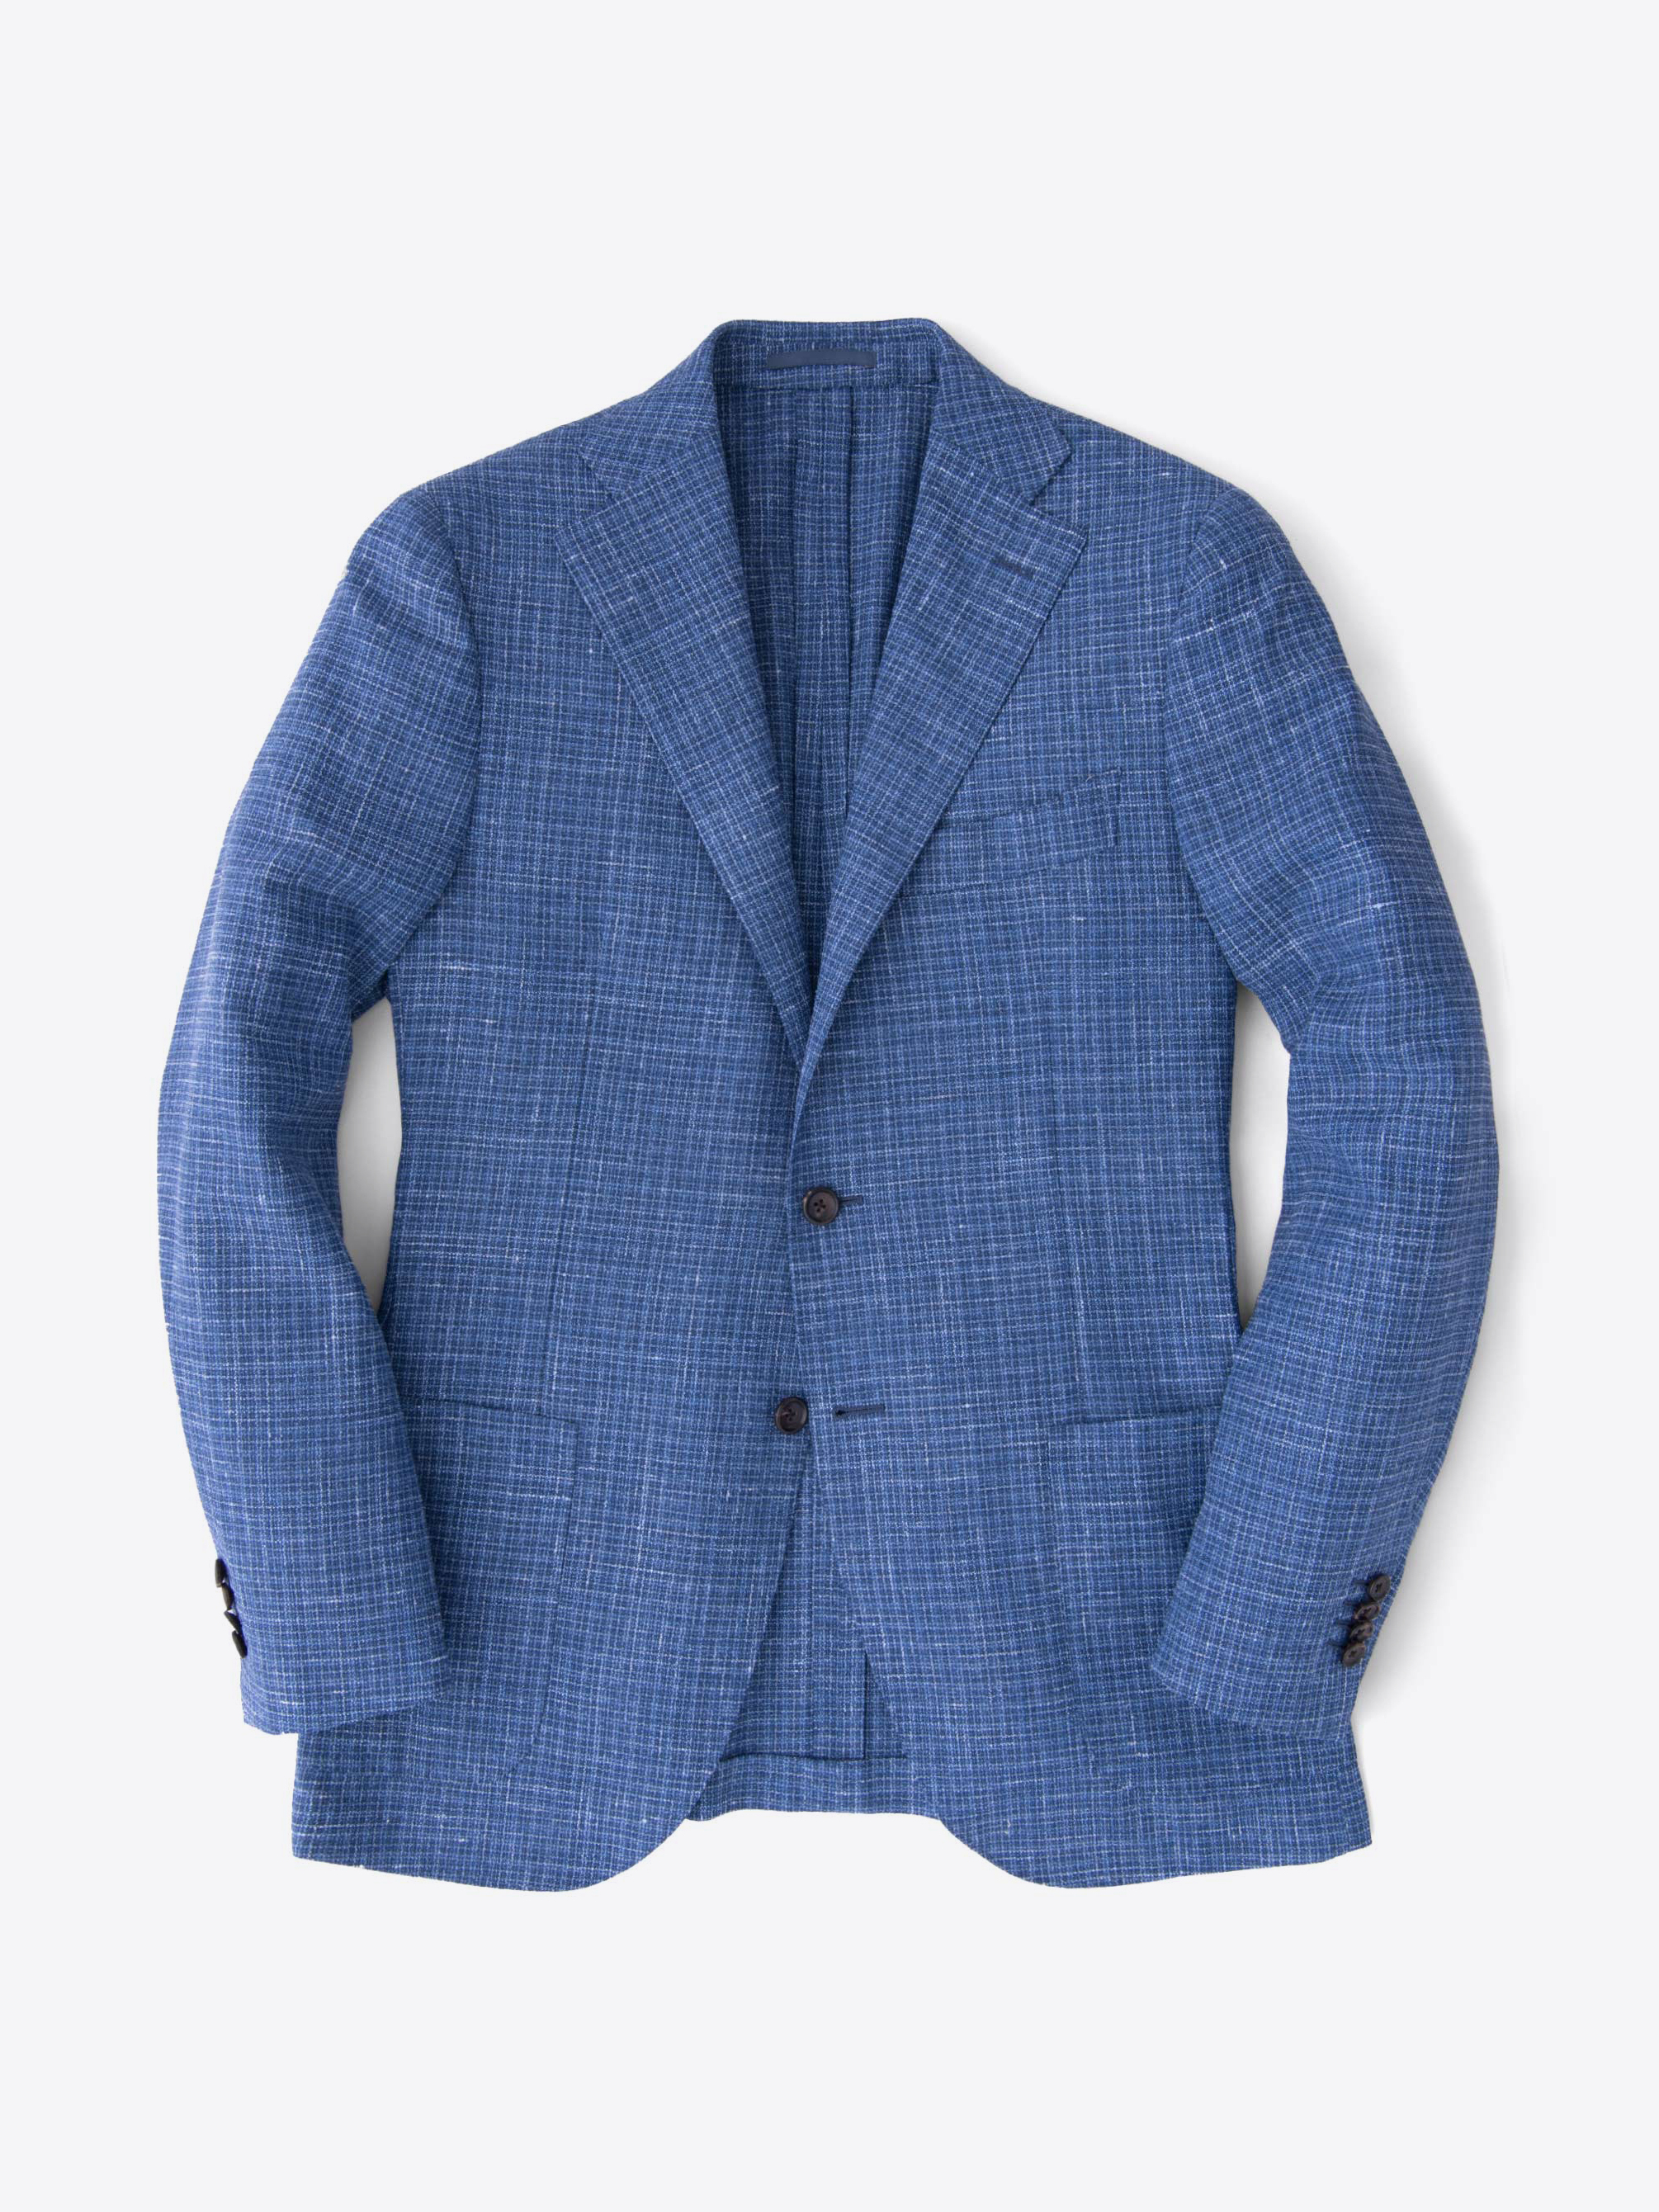 Zoom Image of Hudson Ocean Blue Textured Micro Check Jacket